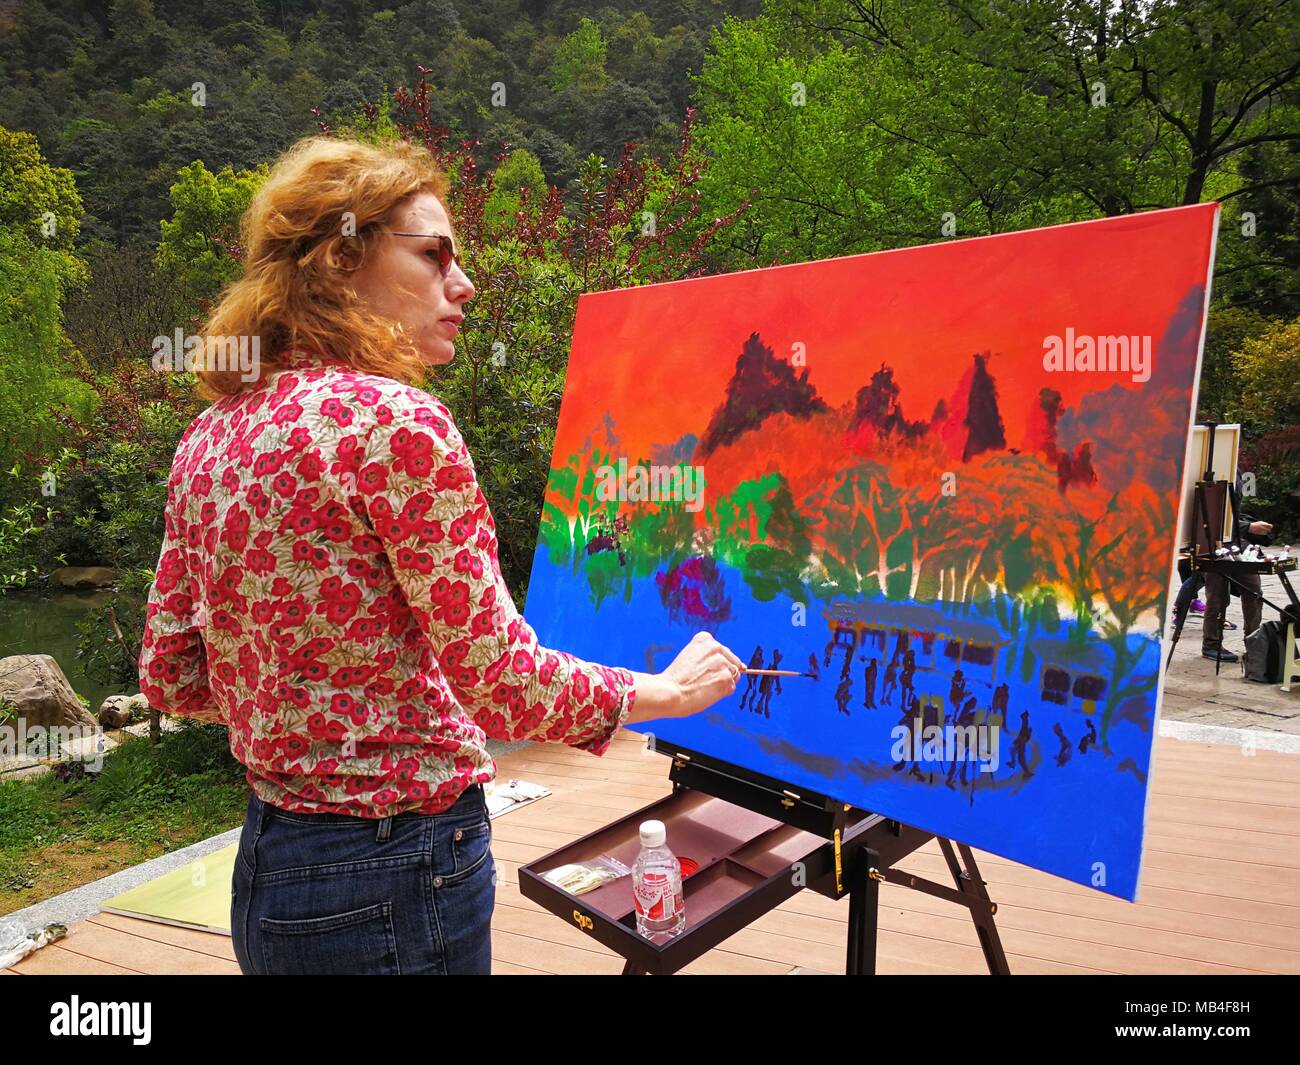 Zhangjiajie, China's Hunan Province. 6th Apr, 2018. Julienna Polidoro from Italy paints at Zhangjiajie UNESCO Global Geopark at Wulingyuan District of Zhangjiajie City, central China's Hunan Province, April 6, 2018. About 21 artists coming from Italy took part in a cultural event at the geopark which is known for its quartzose sandstone landform. This geopark is one of the geoparks in China that have already been chosen by UNESCO on its World Network of Geoparks. Credit: Wang Jianjun/Xinhua/Alamy Live News Stock Photo